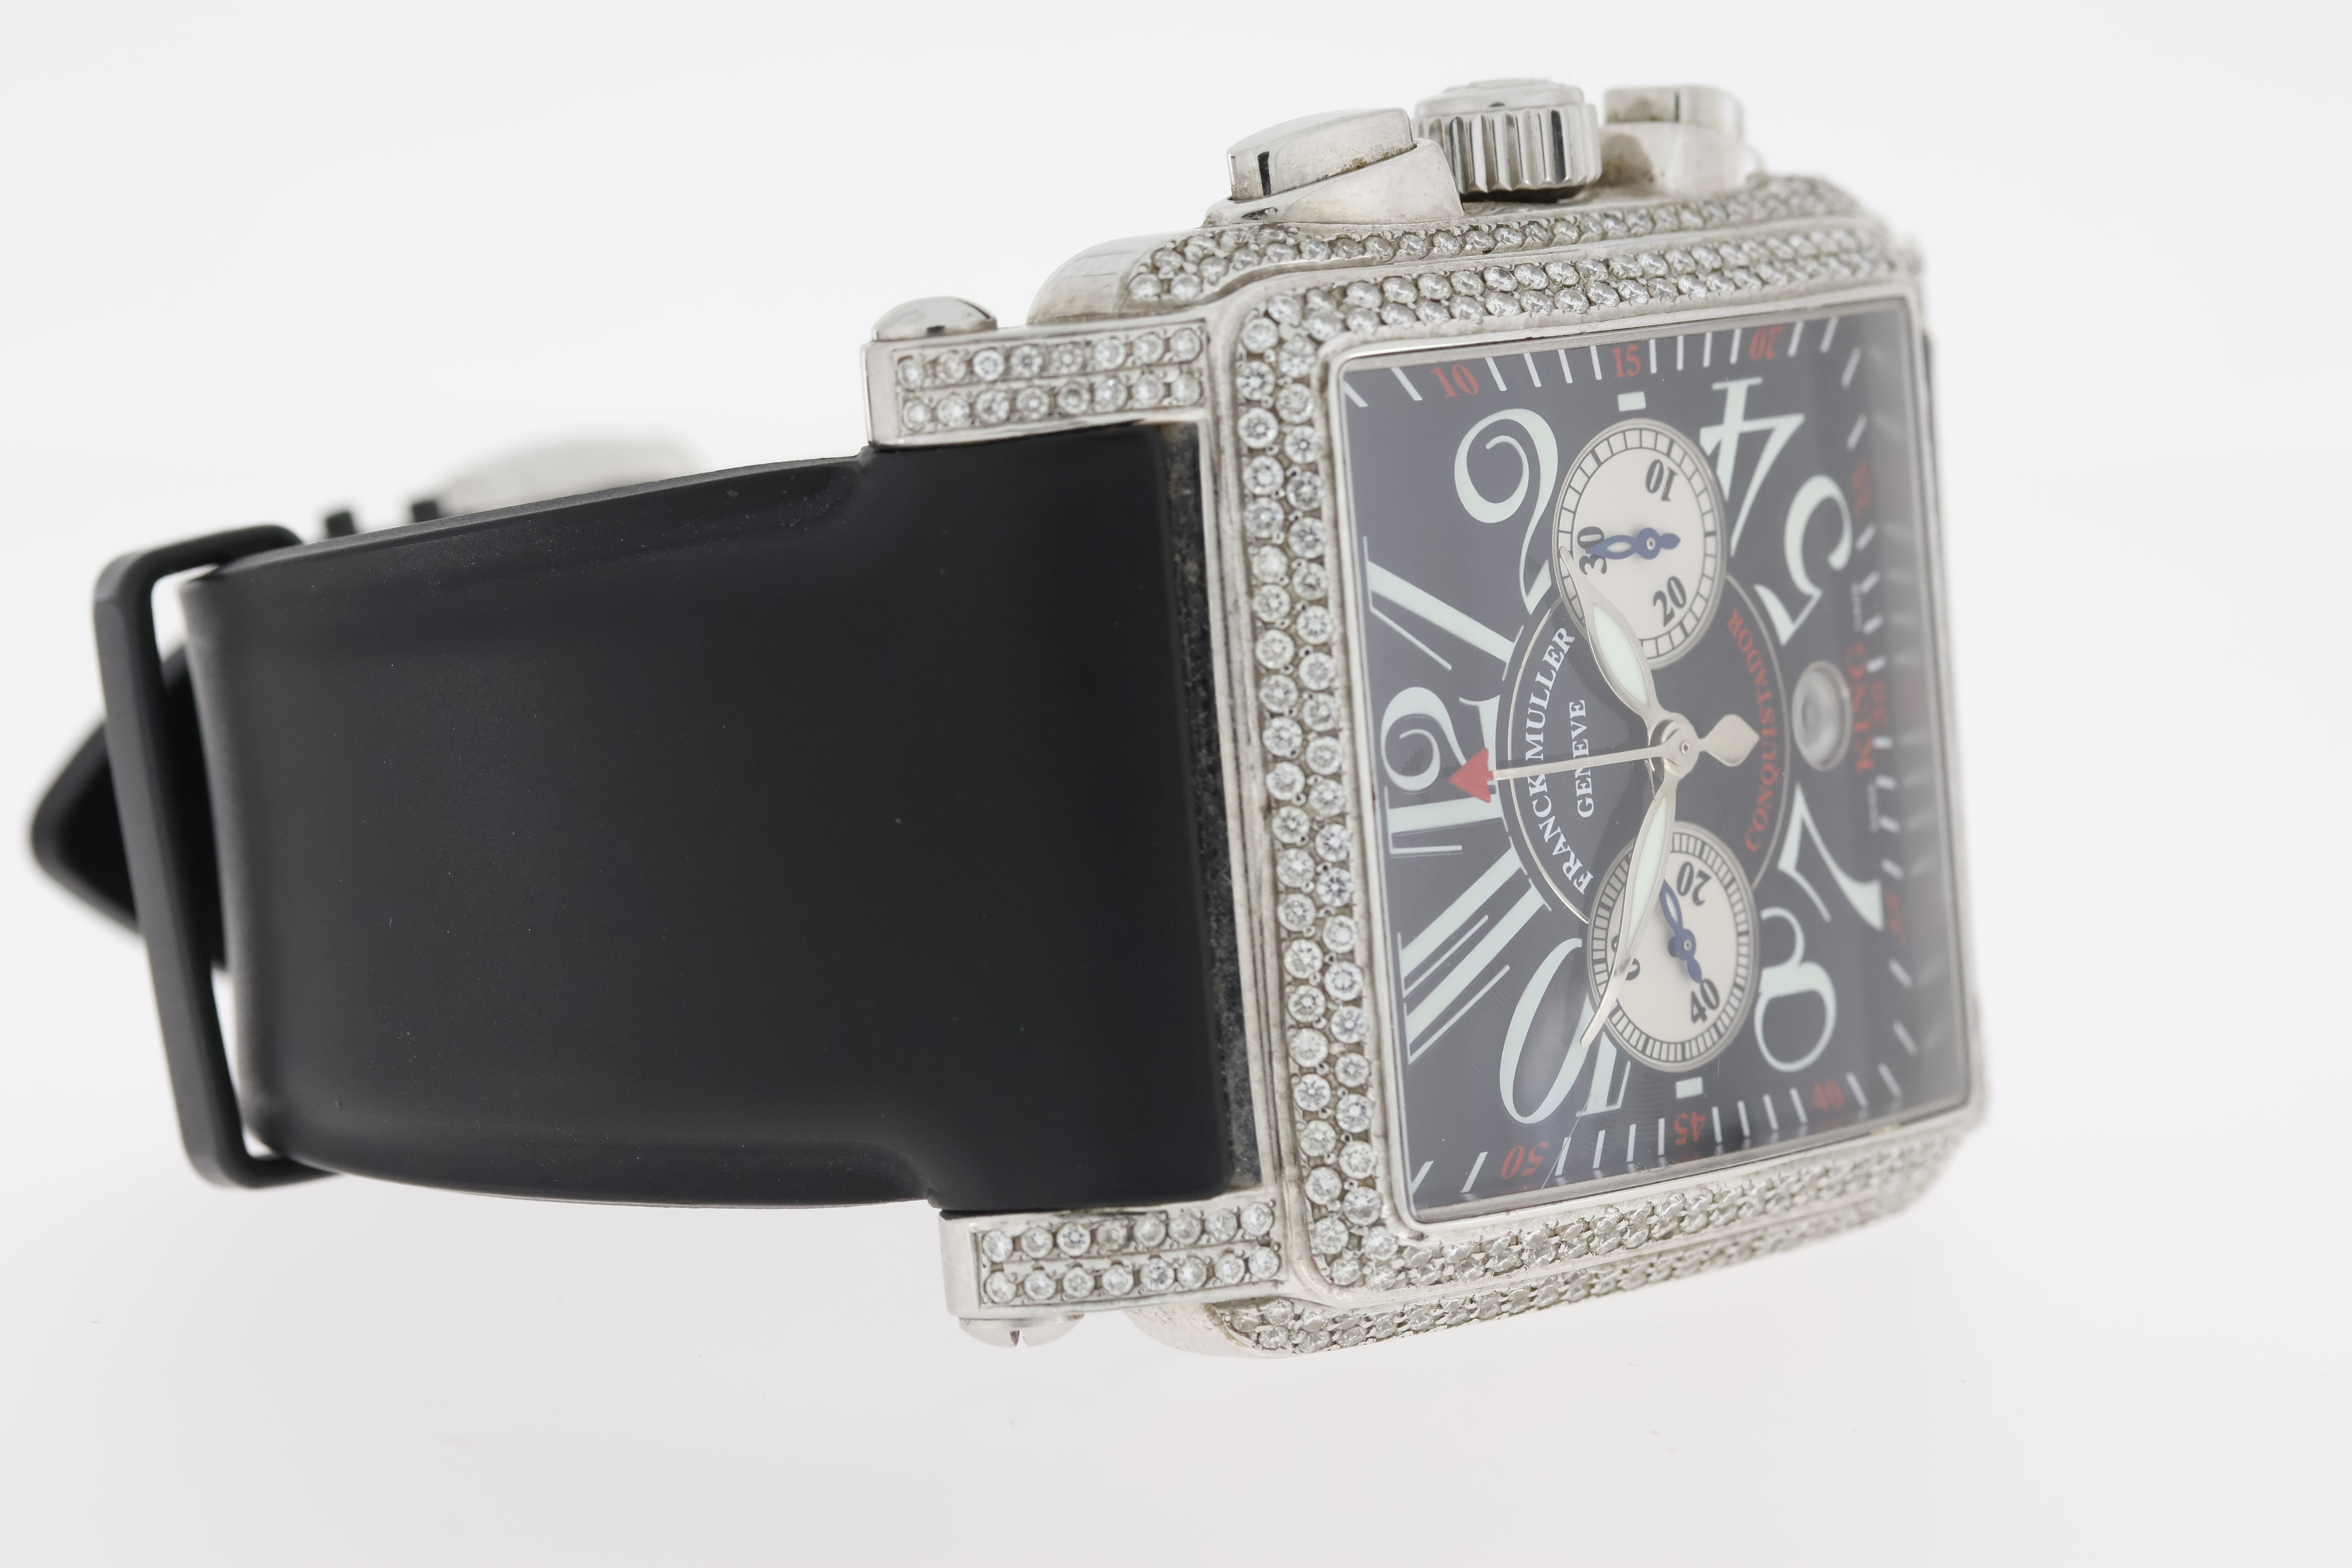 FRANCK MULLER CONQUISTADOR CORTEZ KING Chronograph Automatic with box and Papers - Image 6 of 9